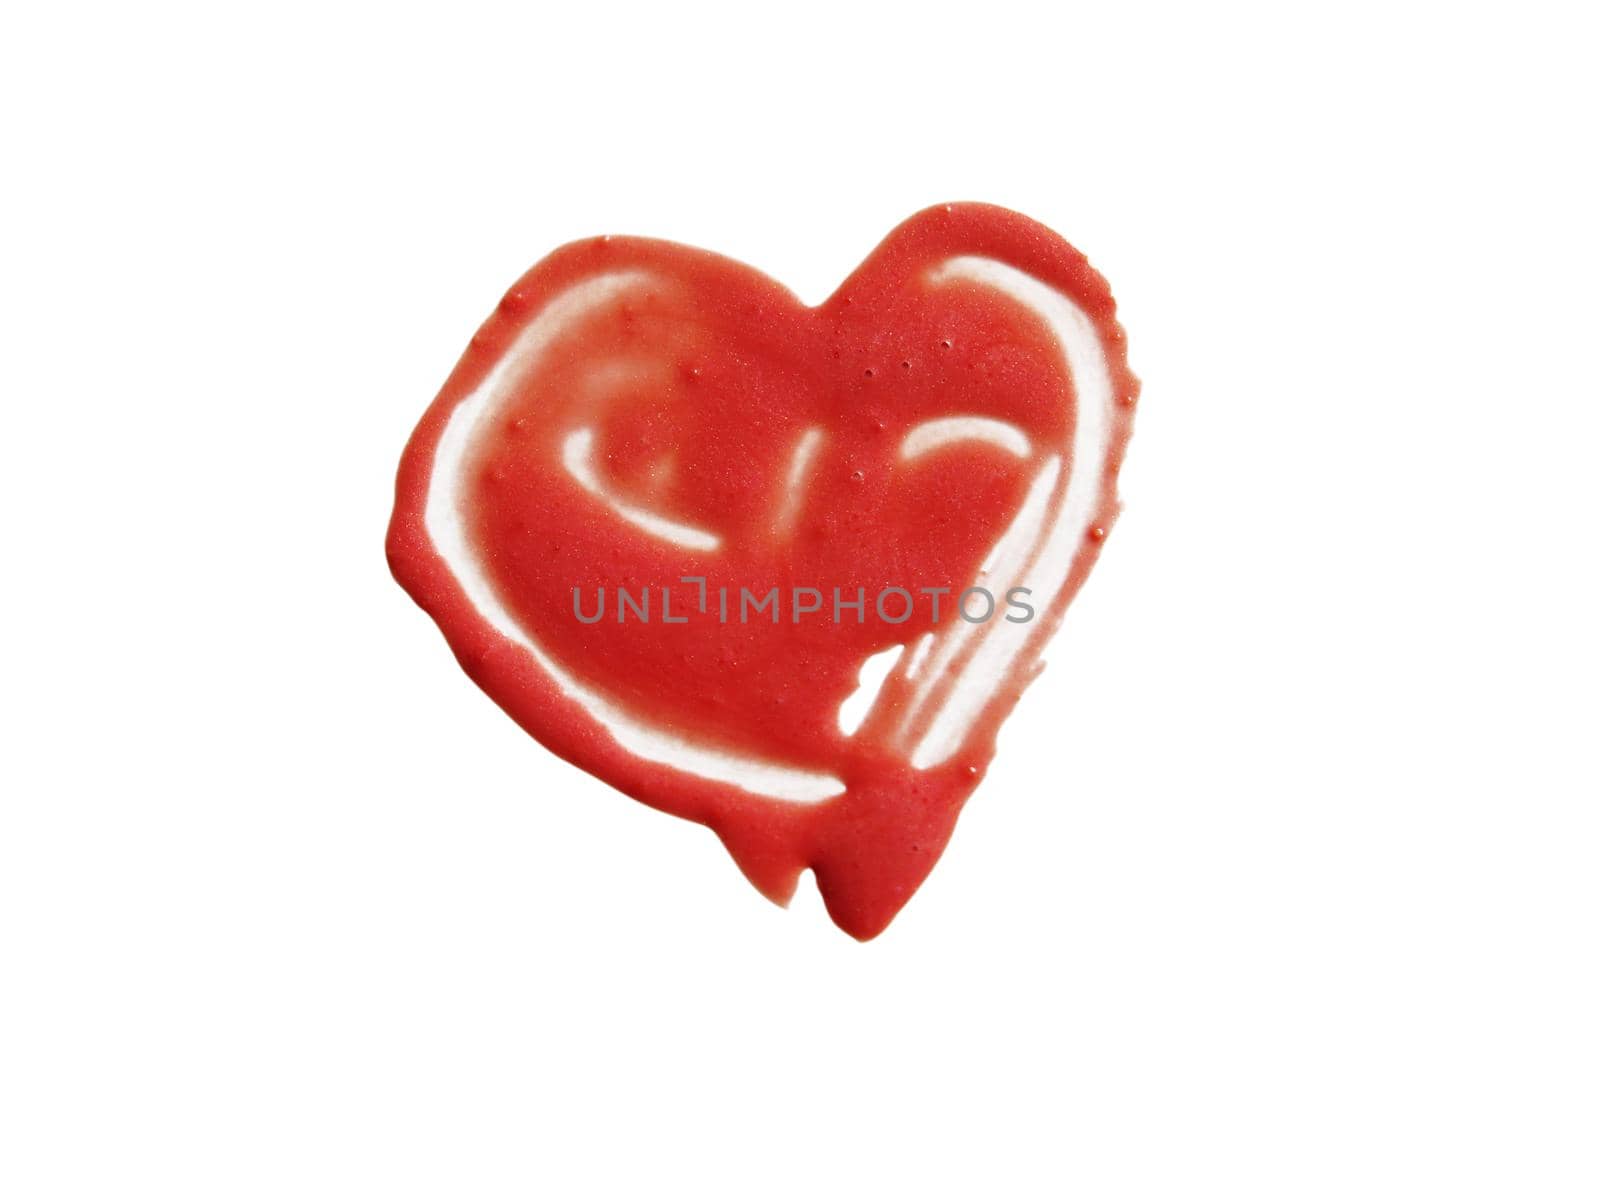 smashed red heart shaped by aroas